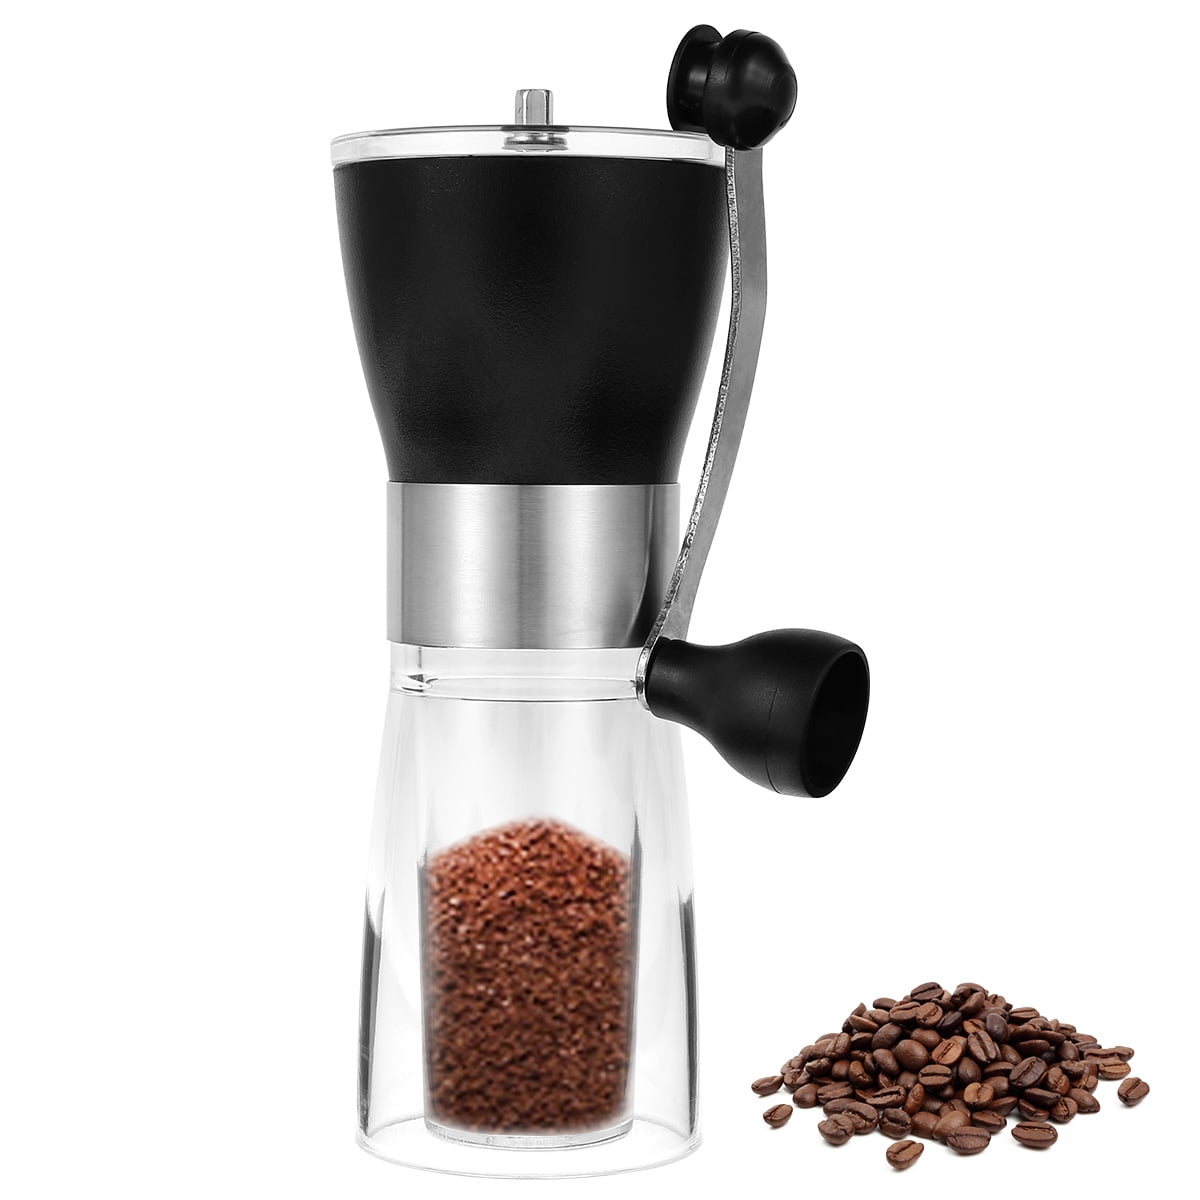  Coffee Bean Grinder, Manual Burr Coffee Grinder Hand Coffee  Mill Small Pepper Salt and Spice Grinder, Espresso Coffee Maker Grinder for  Travel and Camping : Home & Kitchen